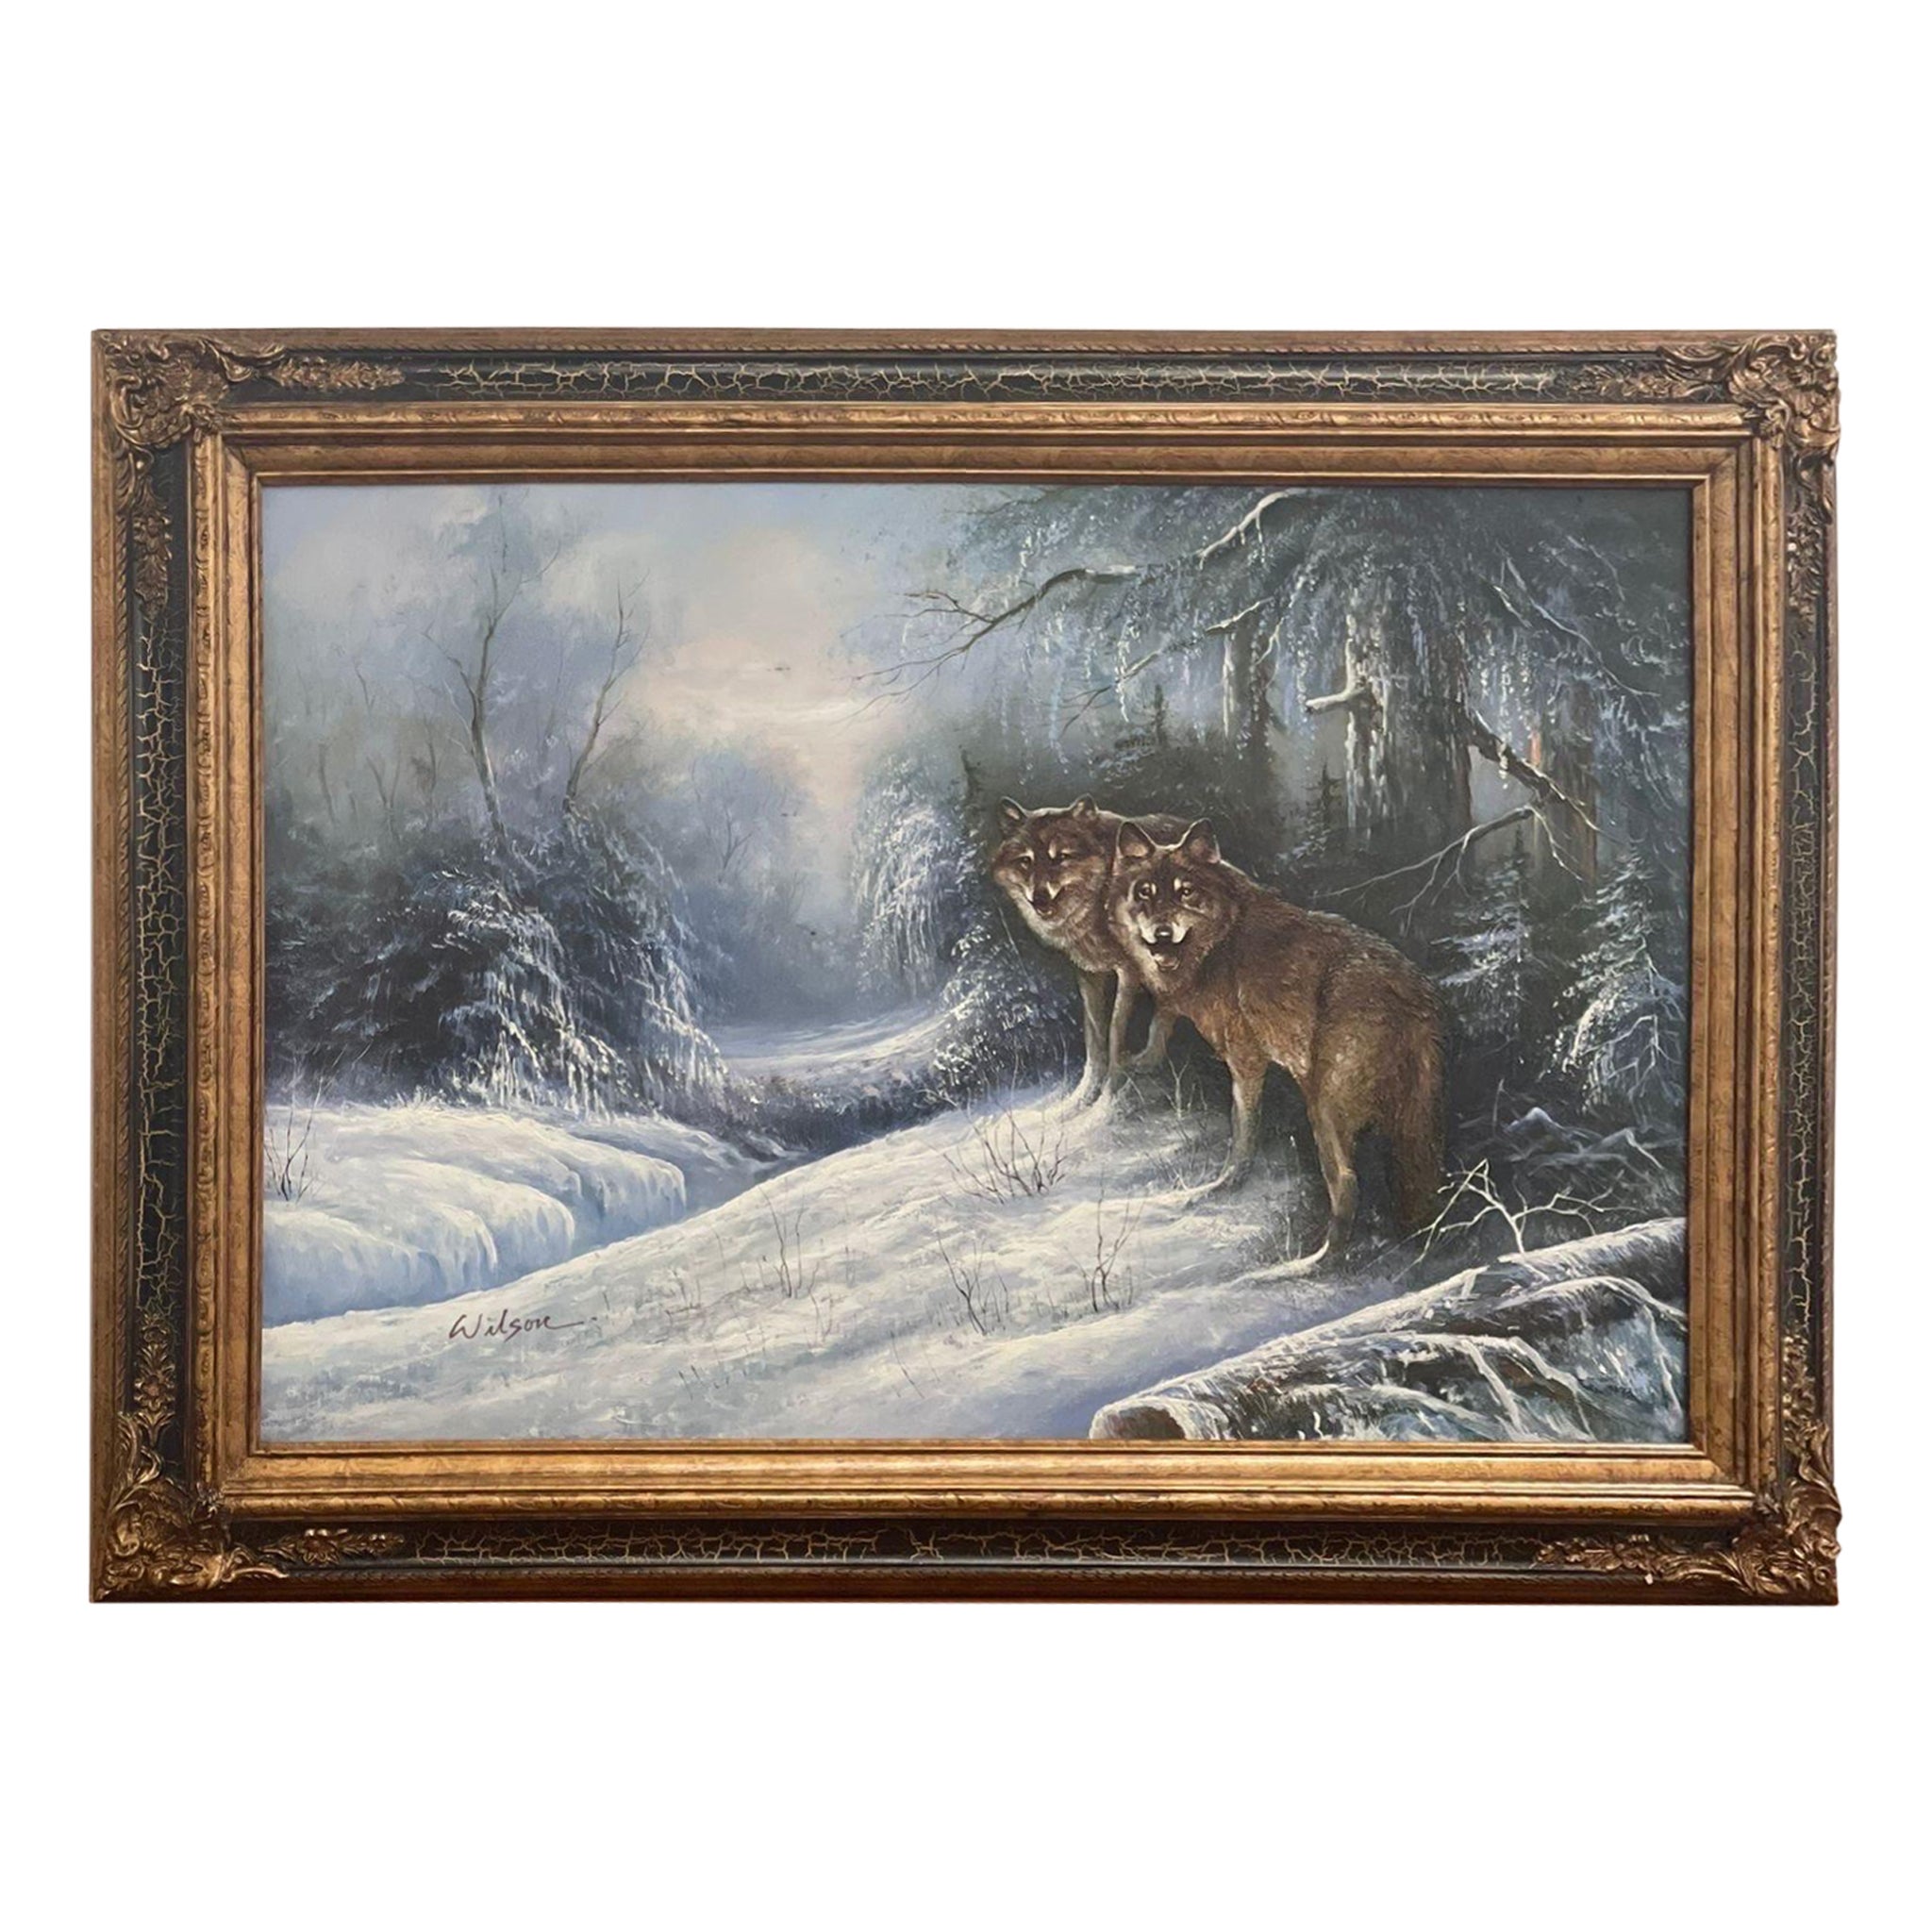 Vintage Framed and Signed Painting of Wolves in the Woods.